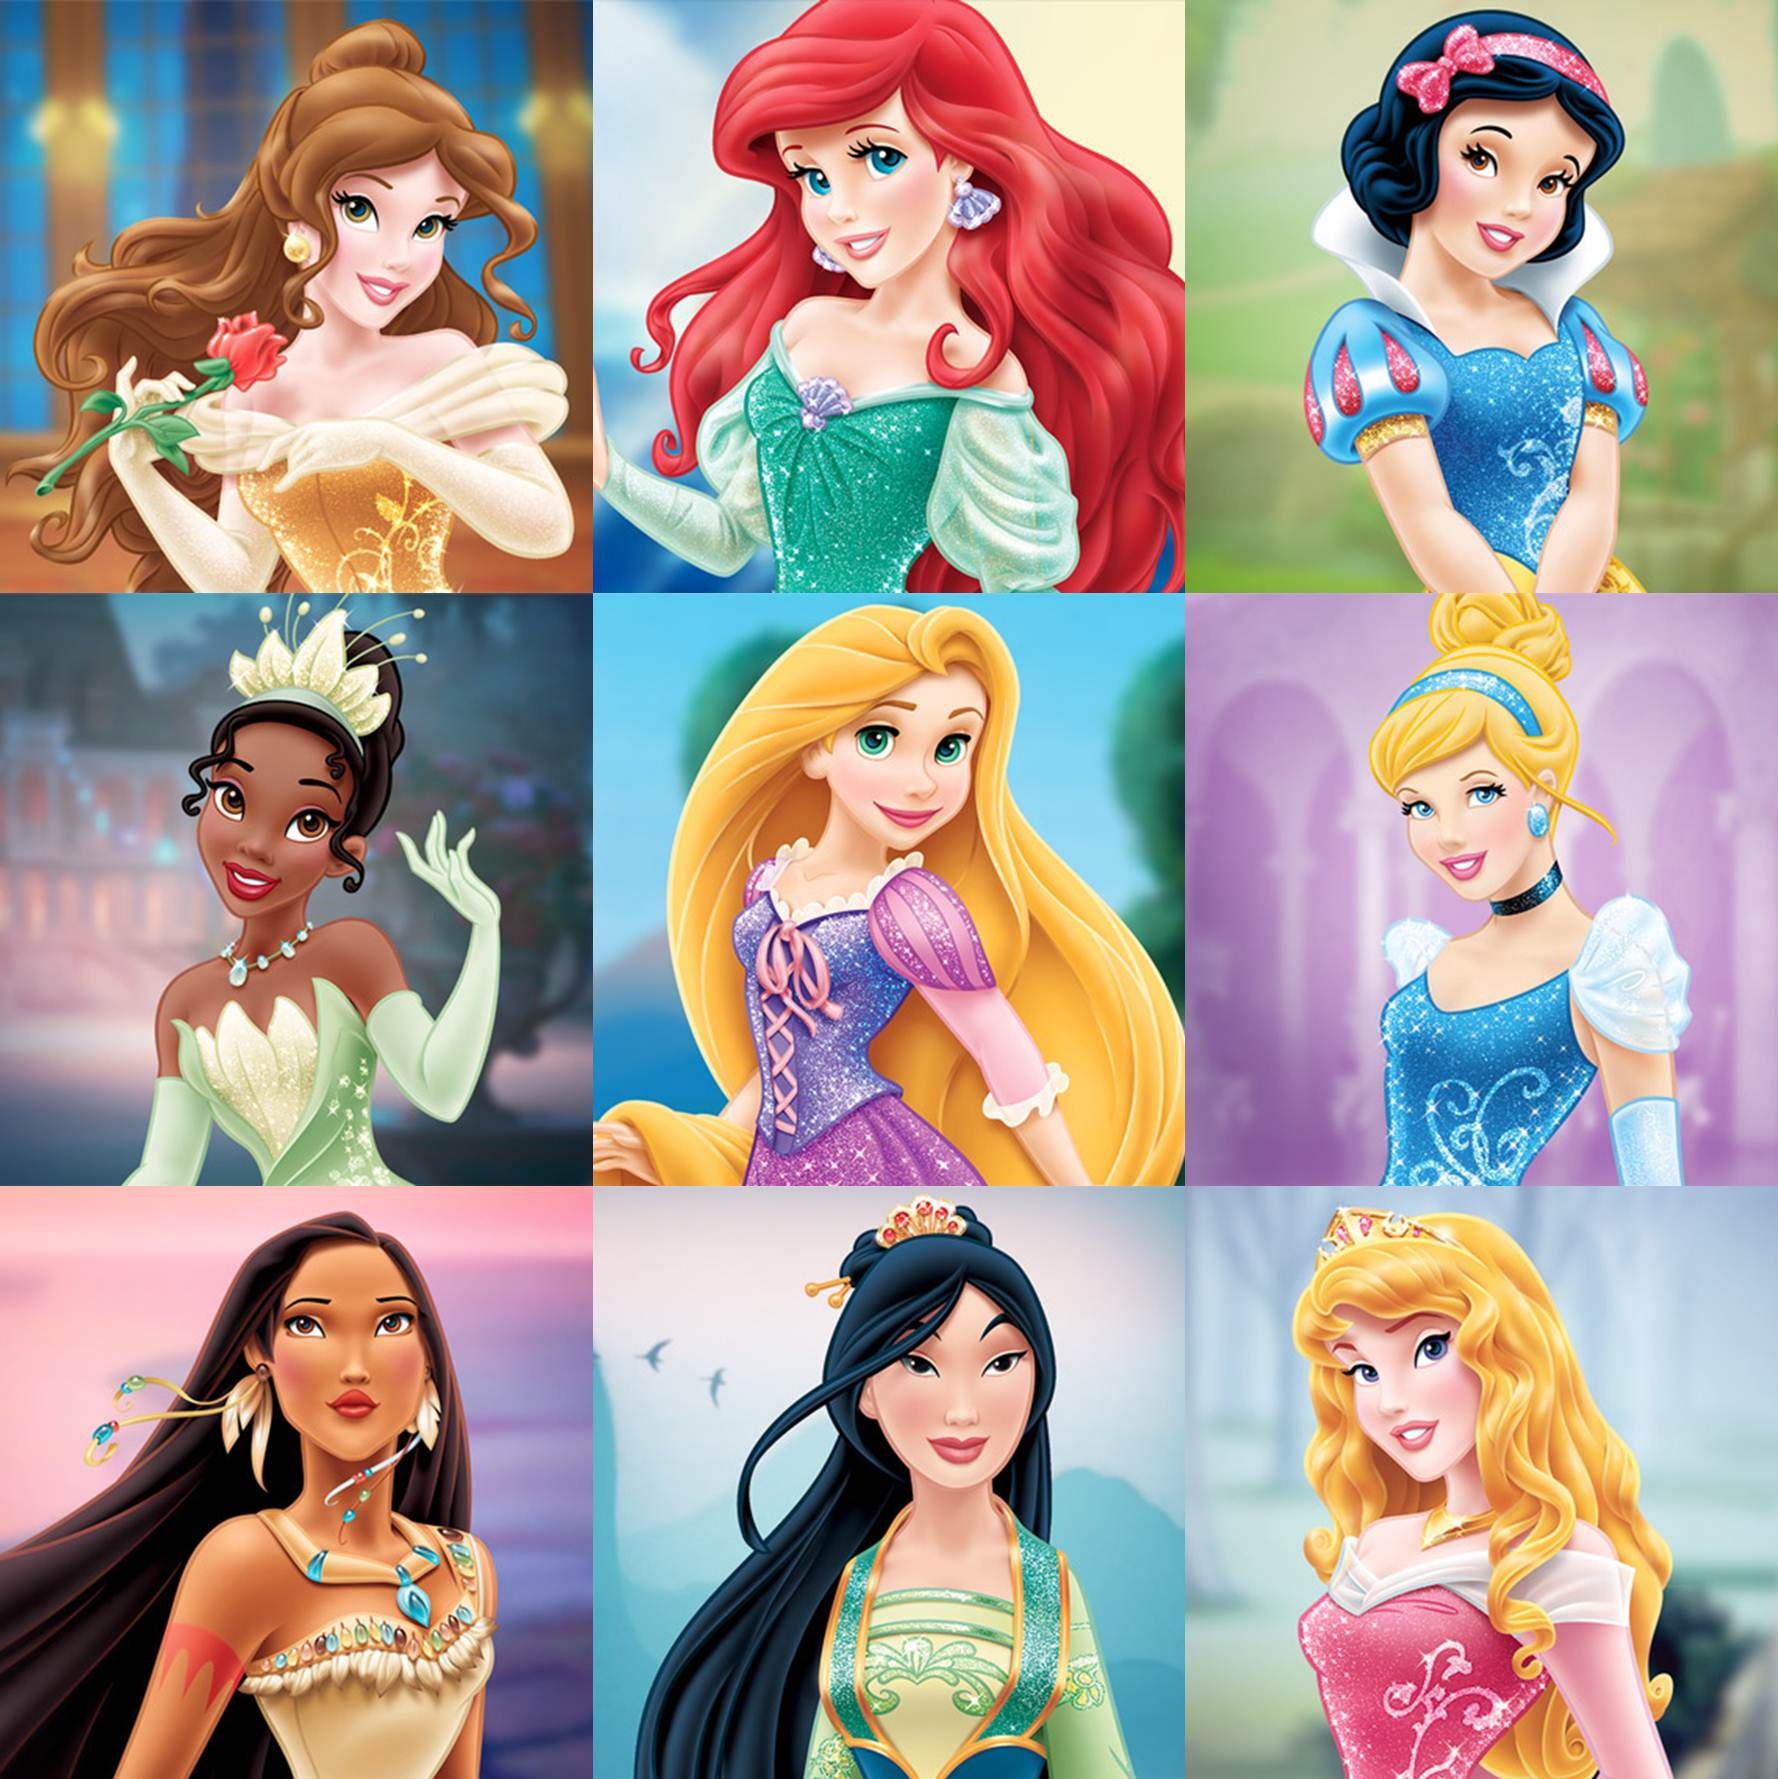 Albums 92+ Images show me a picture of all the disney princesses Full HD, 2k, 4k